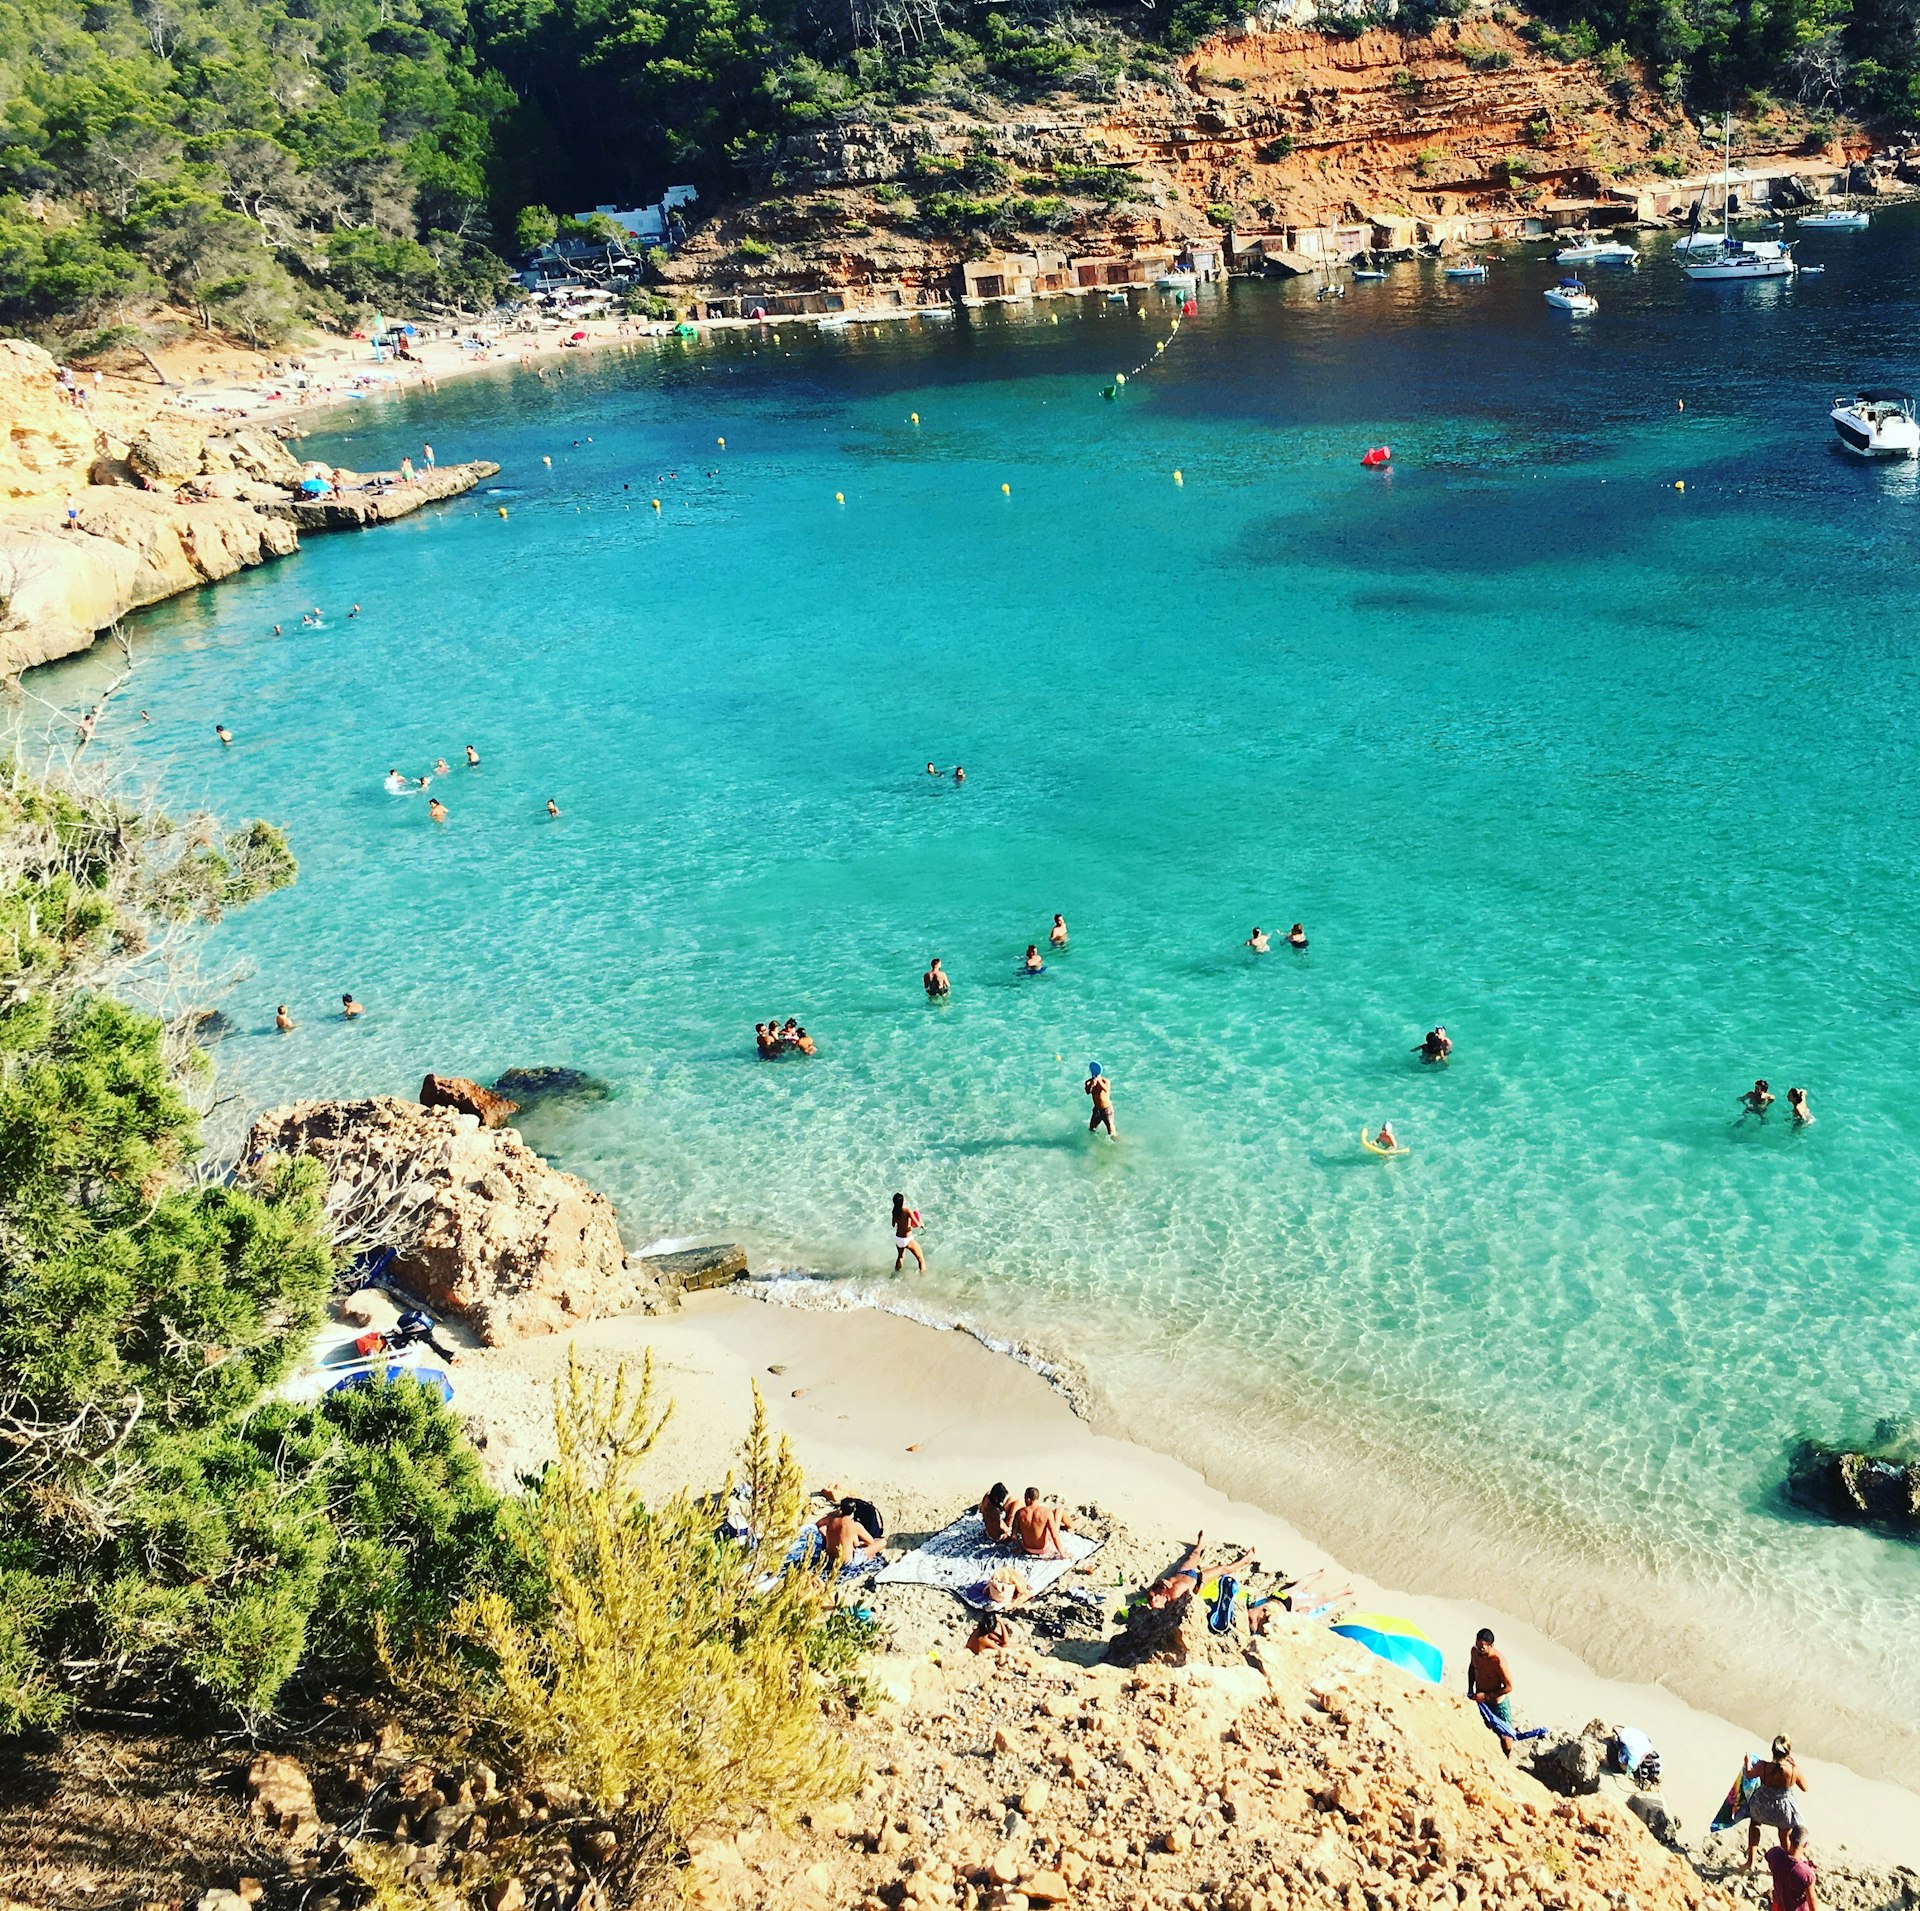 People swimming in the turquoise waters of Cala Salada